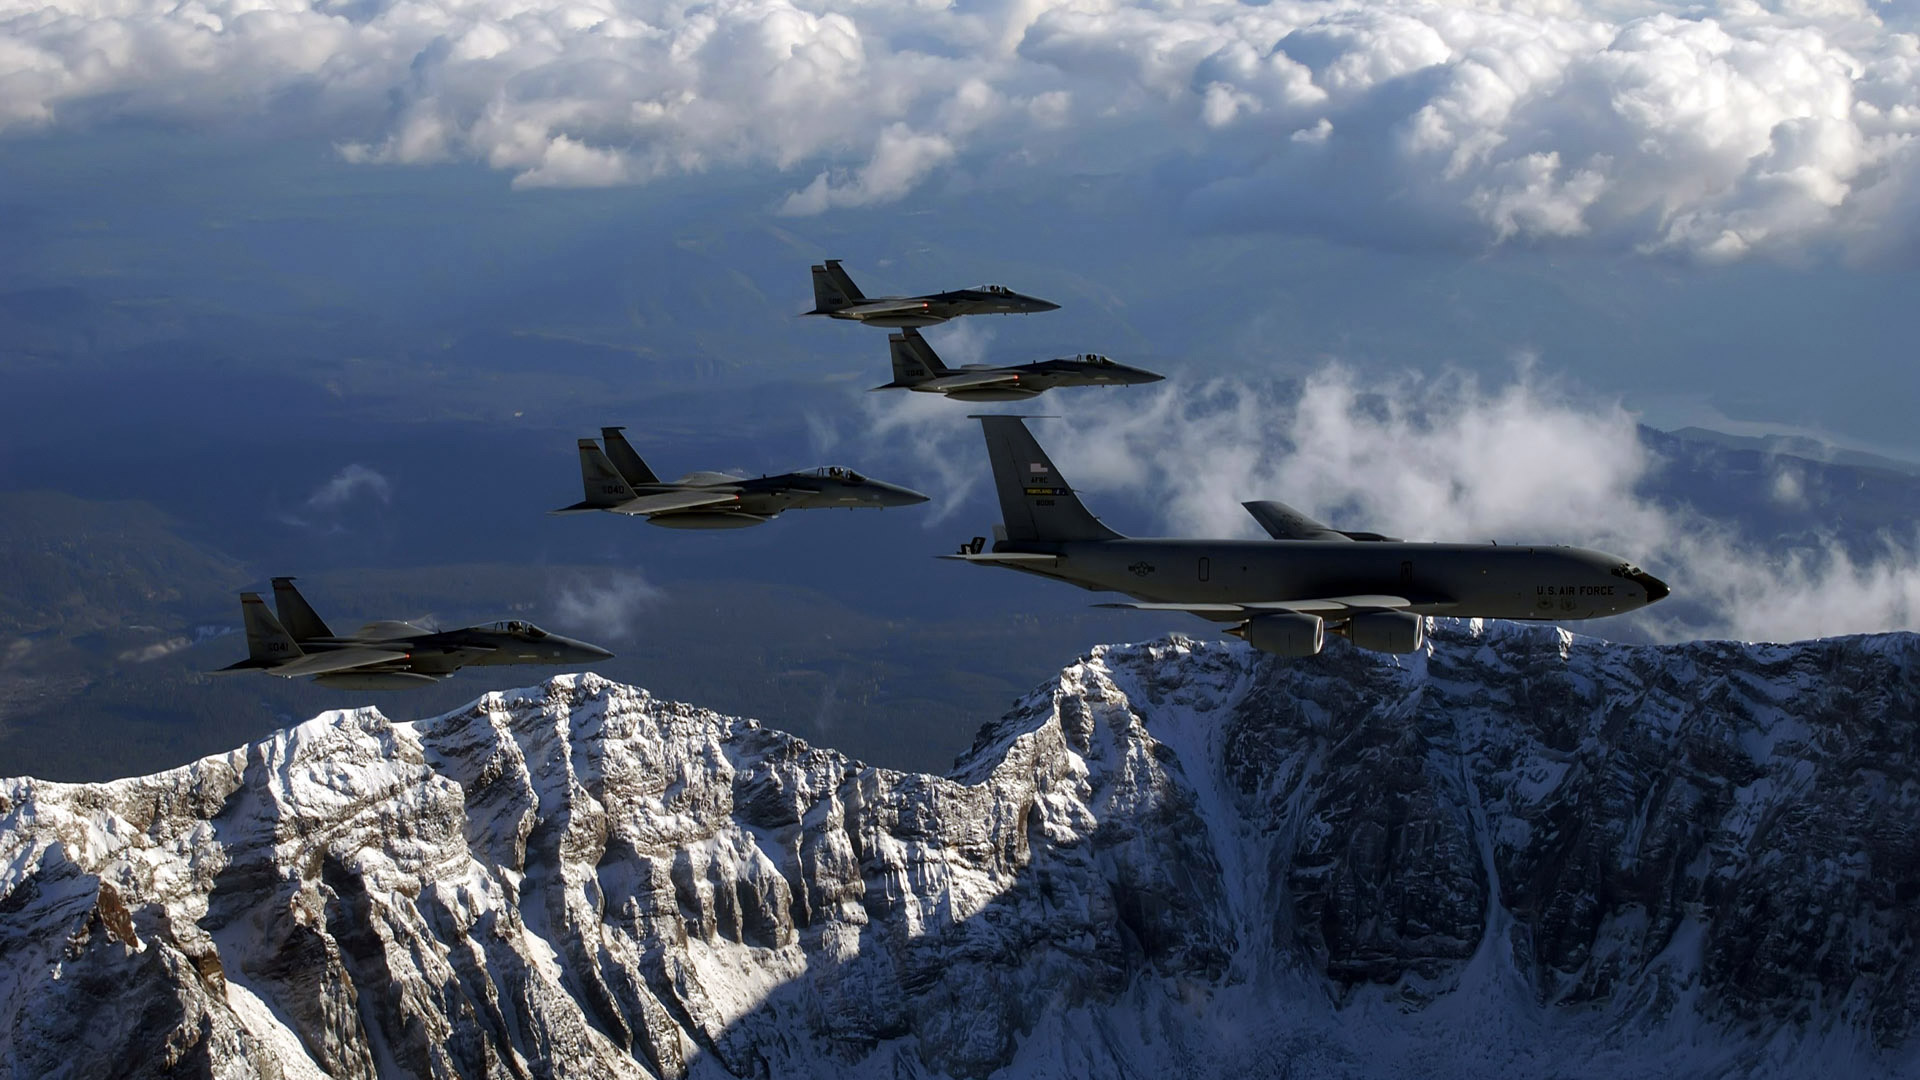 Us Air Force HD Wallpaper And Image For Your Puter Desktop